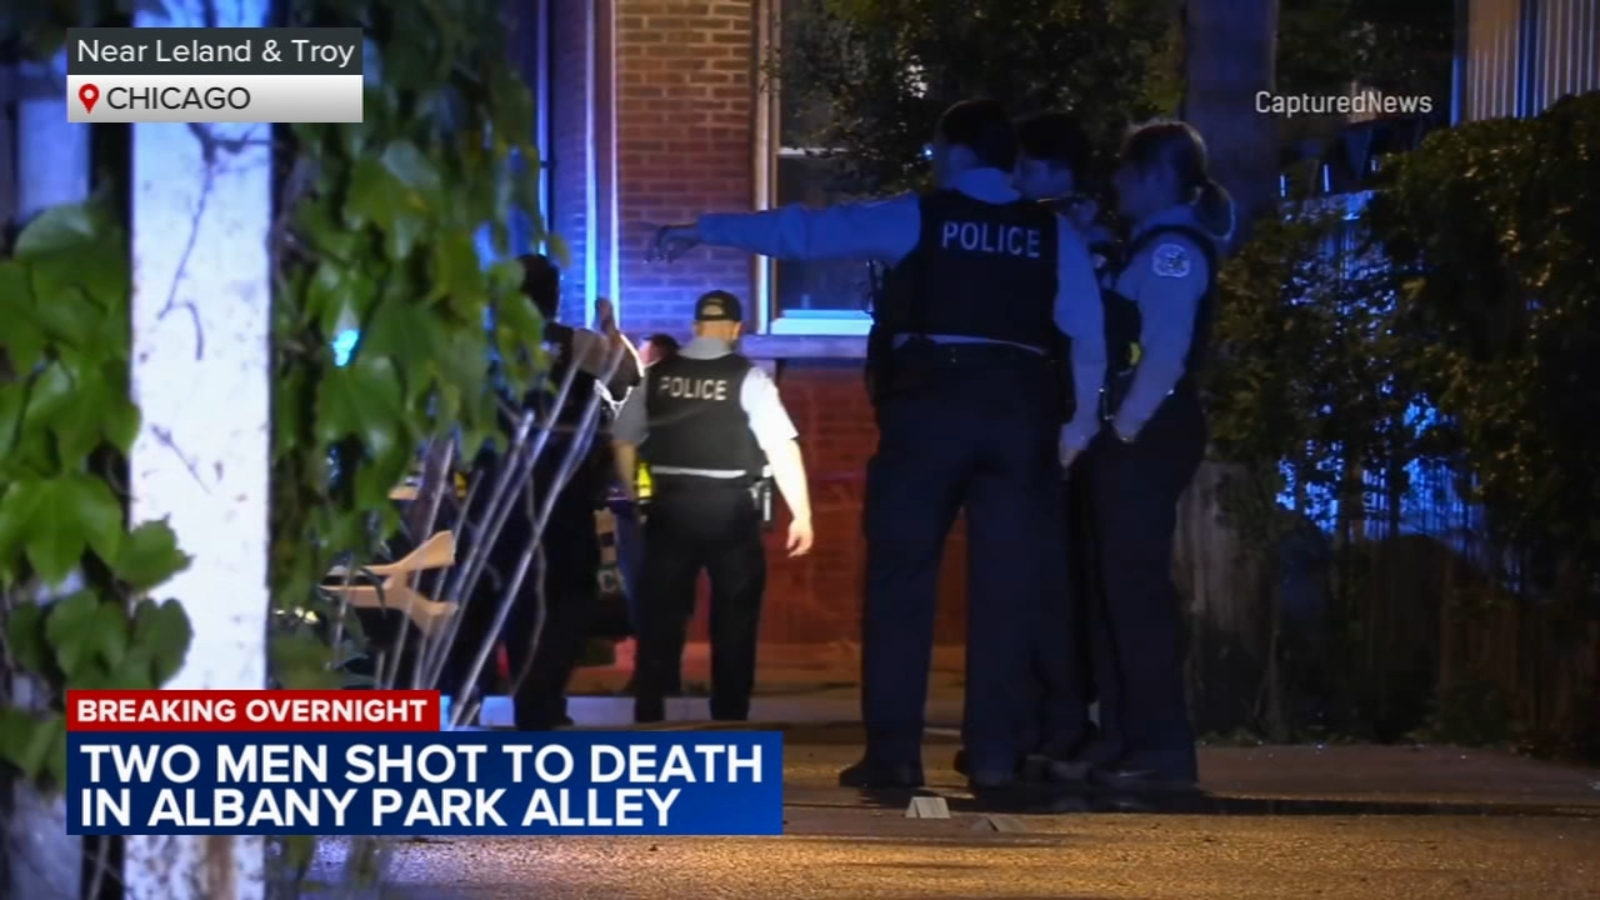 Albany Park, Chicago shooting: Victor Rodriguez, Jaime Serrano shot to death in near Leland and Troy, medical examiner says [Video]